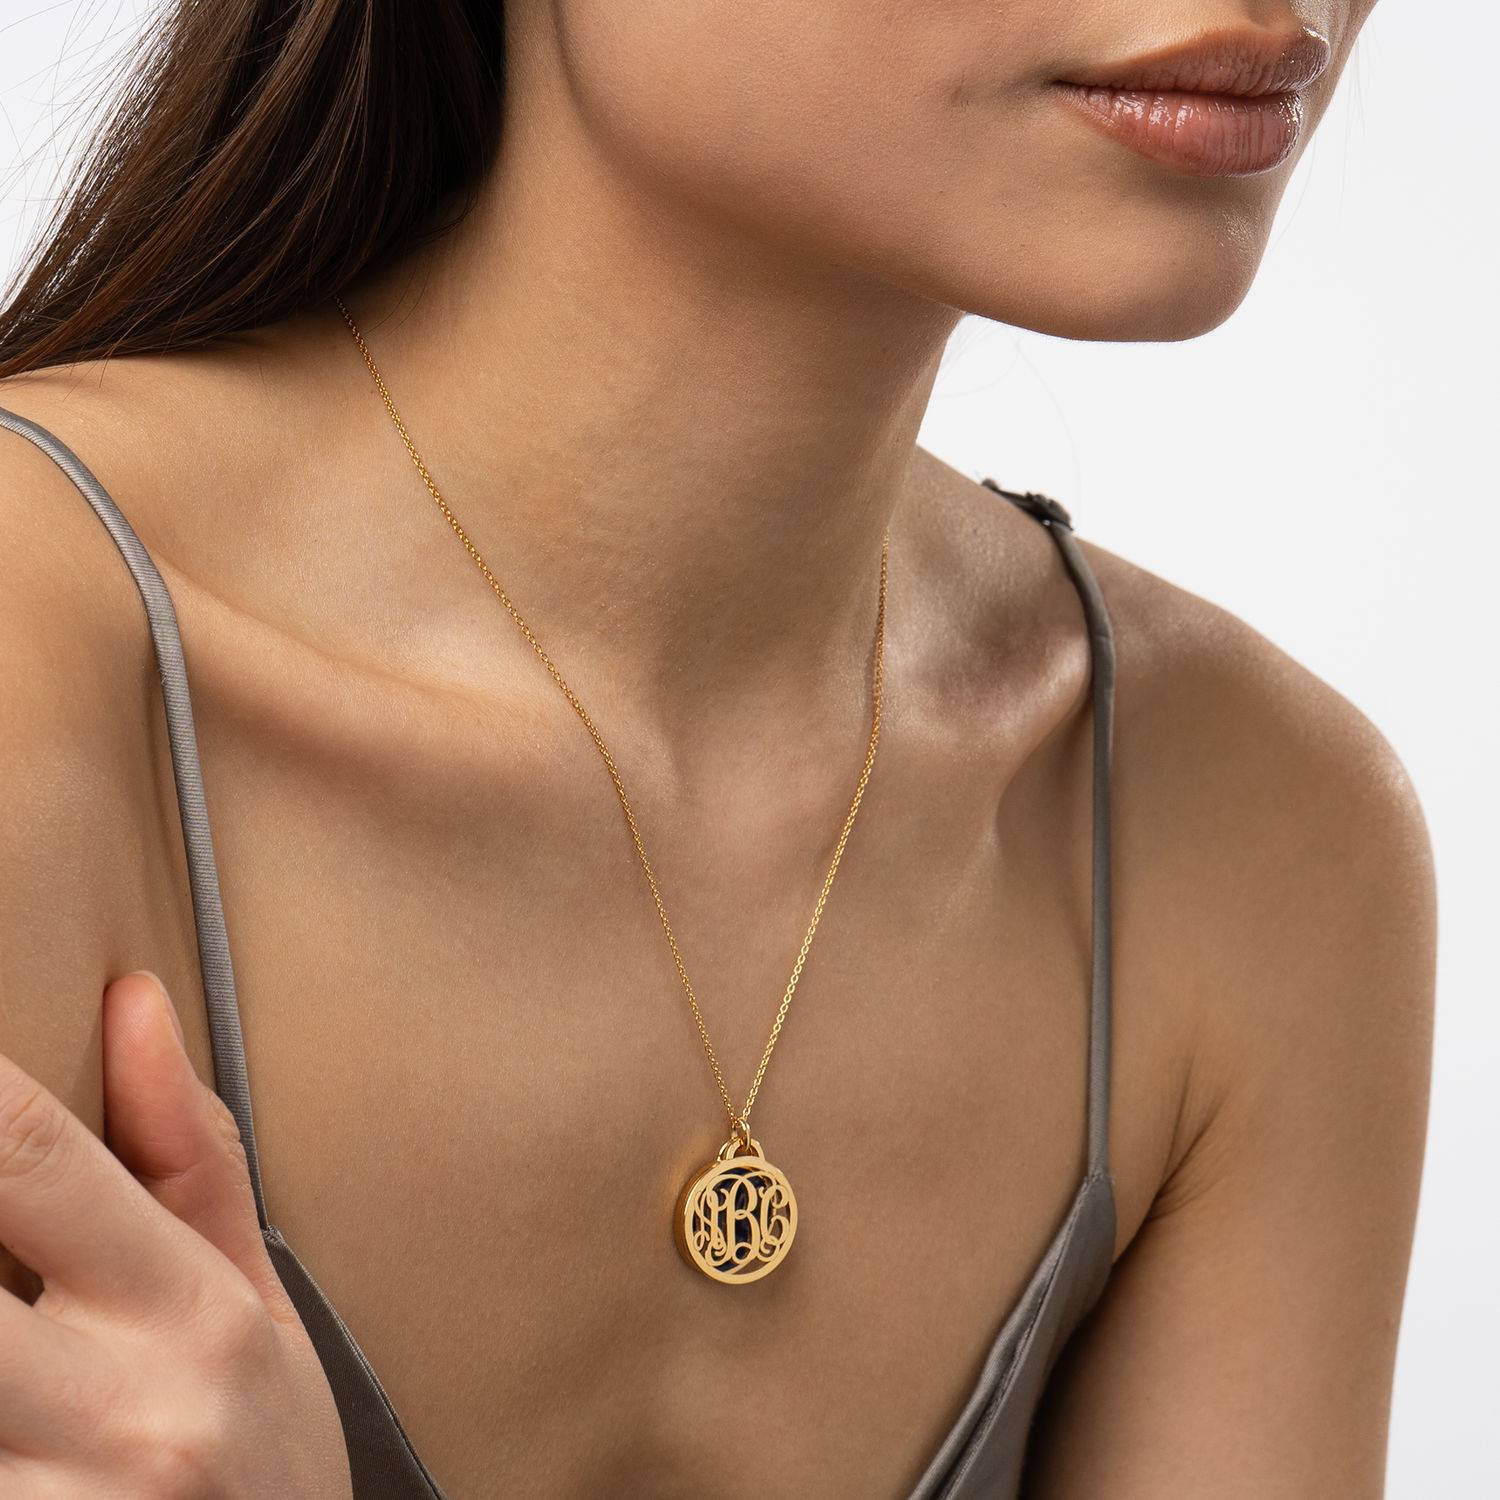 Initial Necklace - Monogram Necklace with Semi-Precious Stone in 18K Gold Vermeil - Letter Necklace - Initial Necklace Gold - Necklace with initials